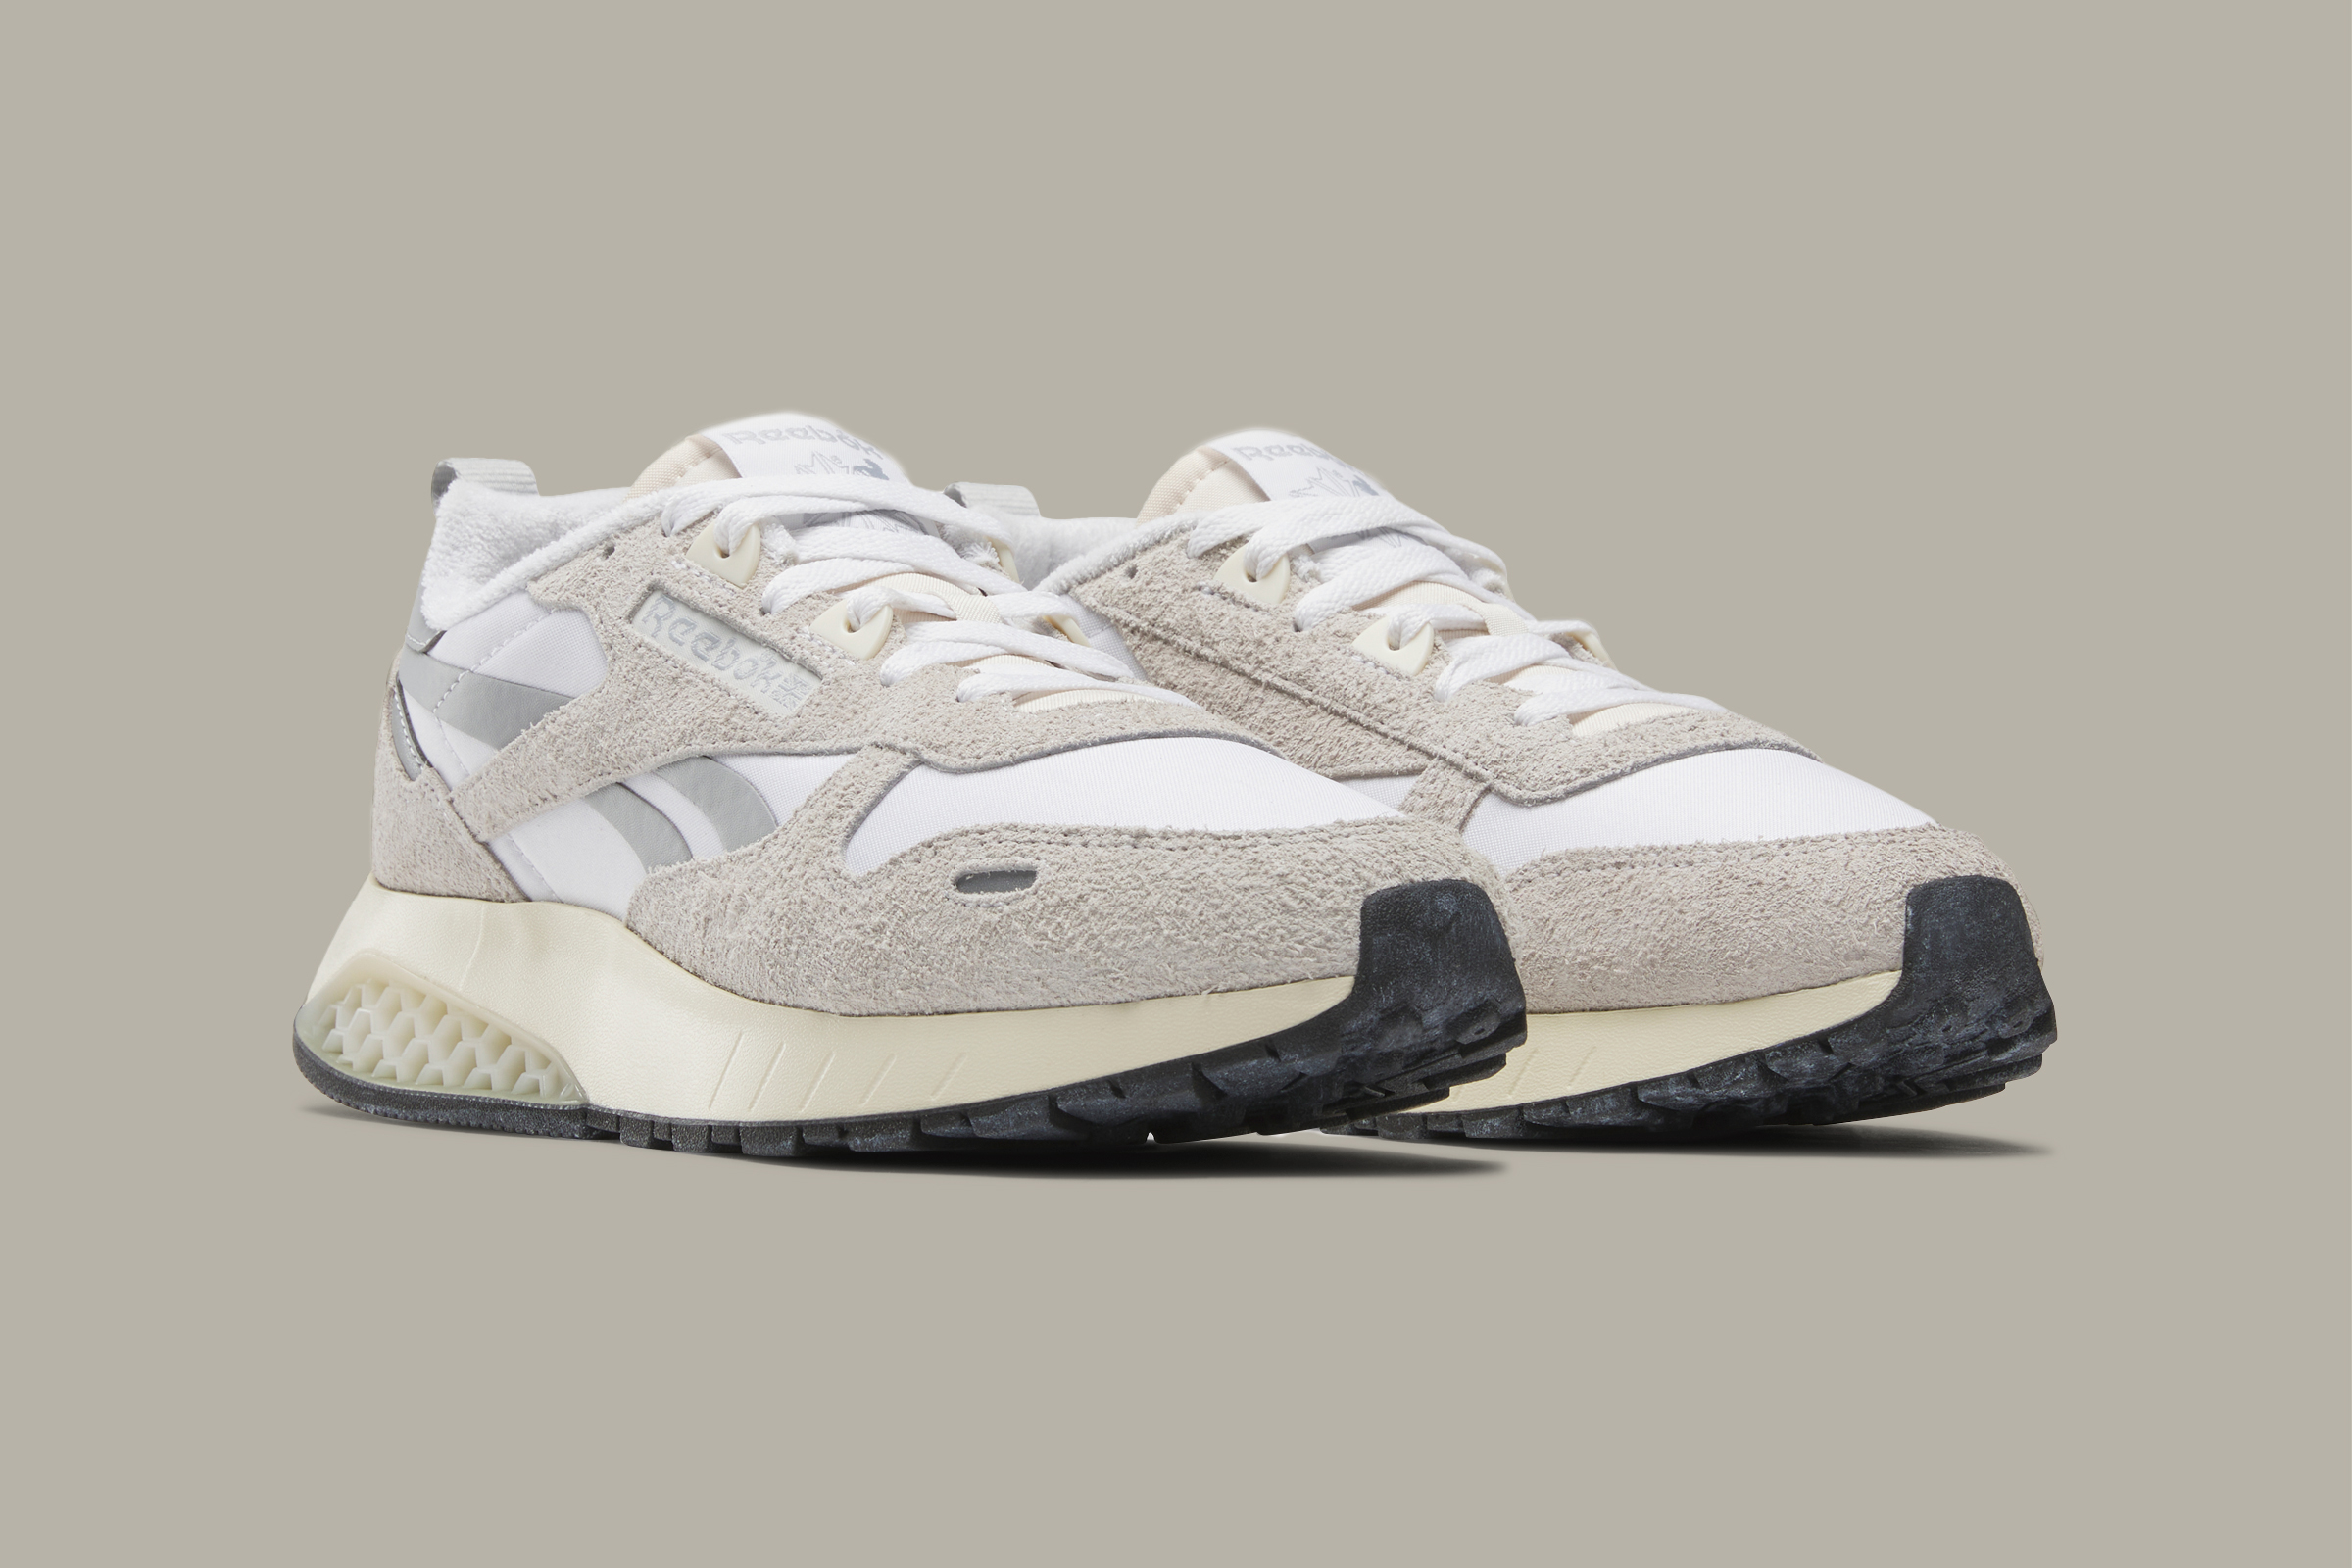 Reebok Introduces the Classic Leather Hexalite+ “Chalk” For Summer